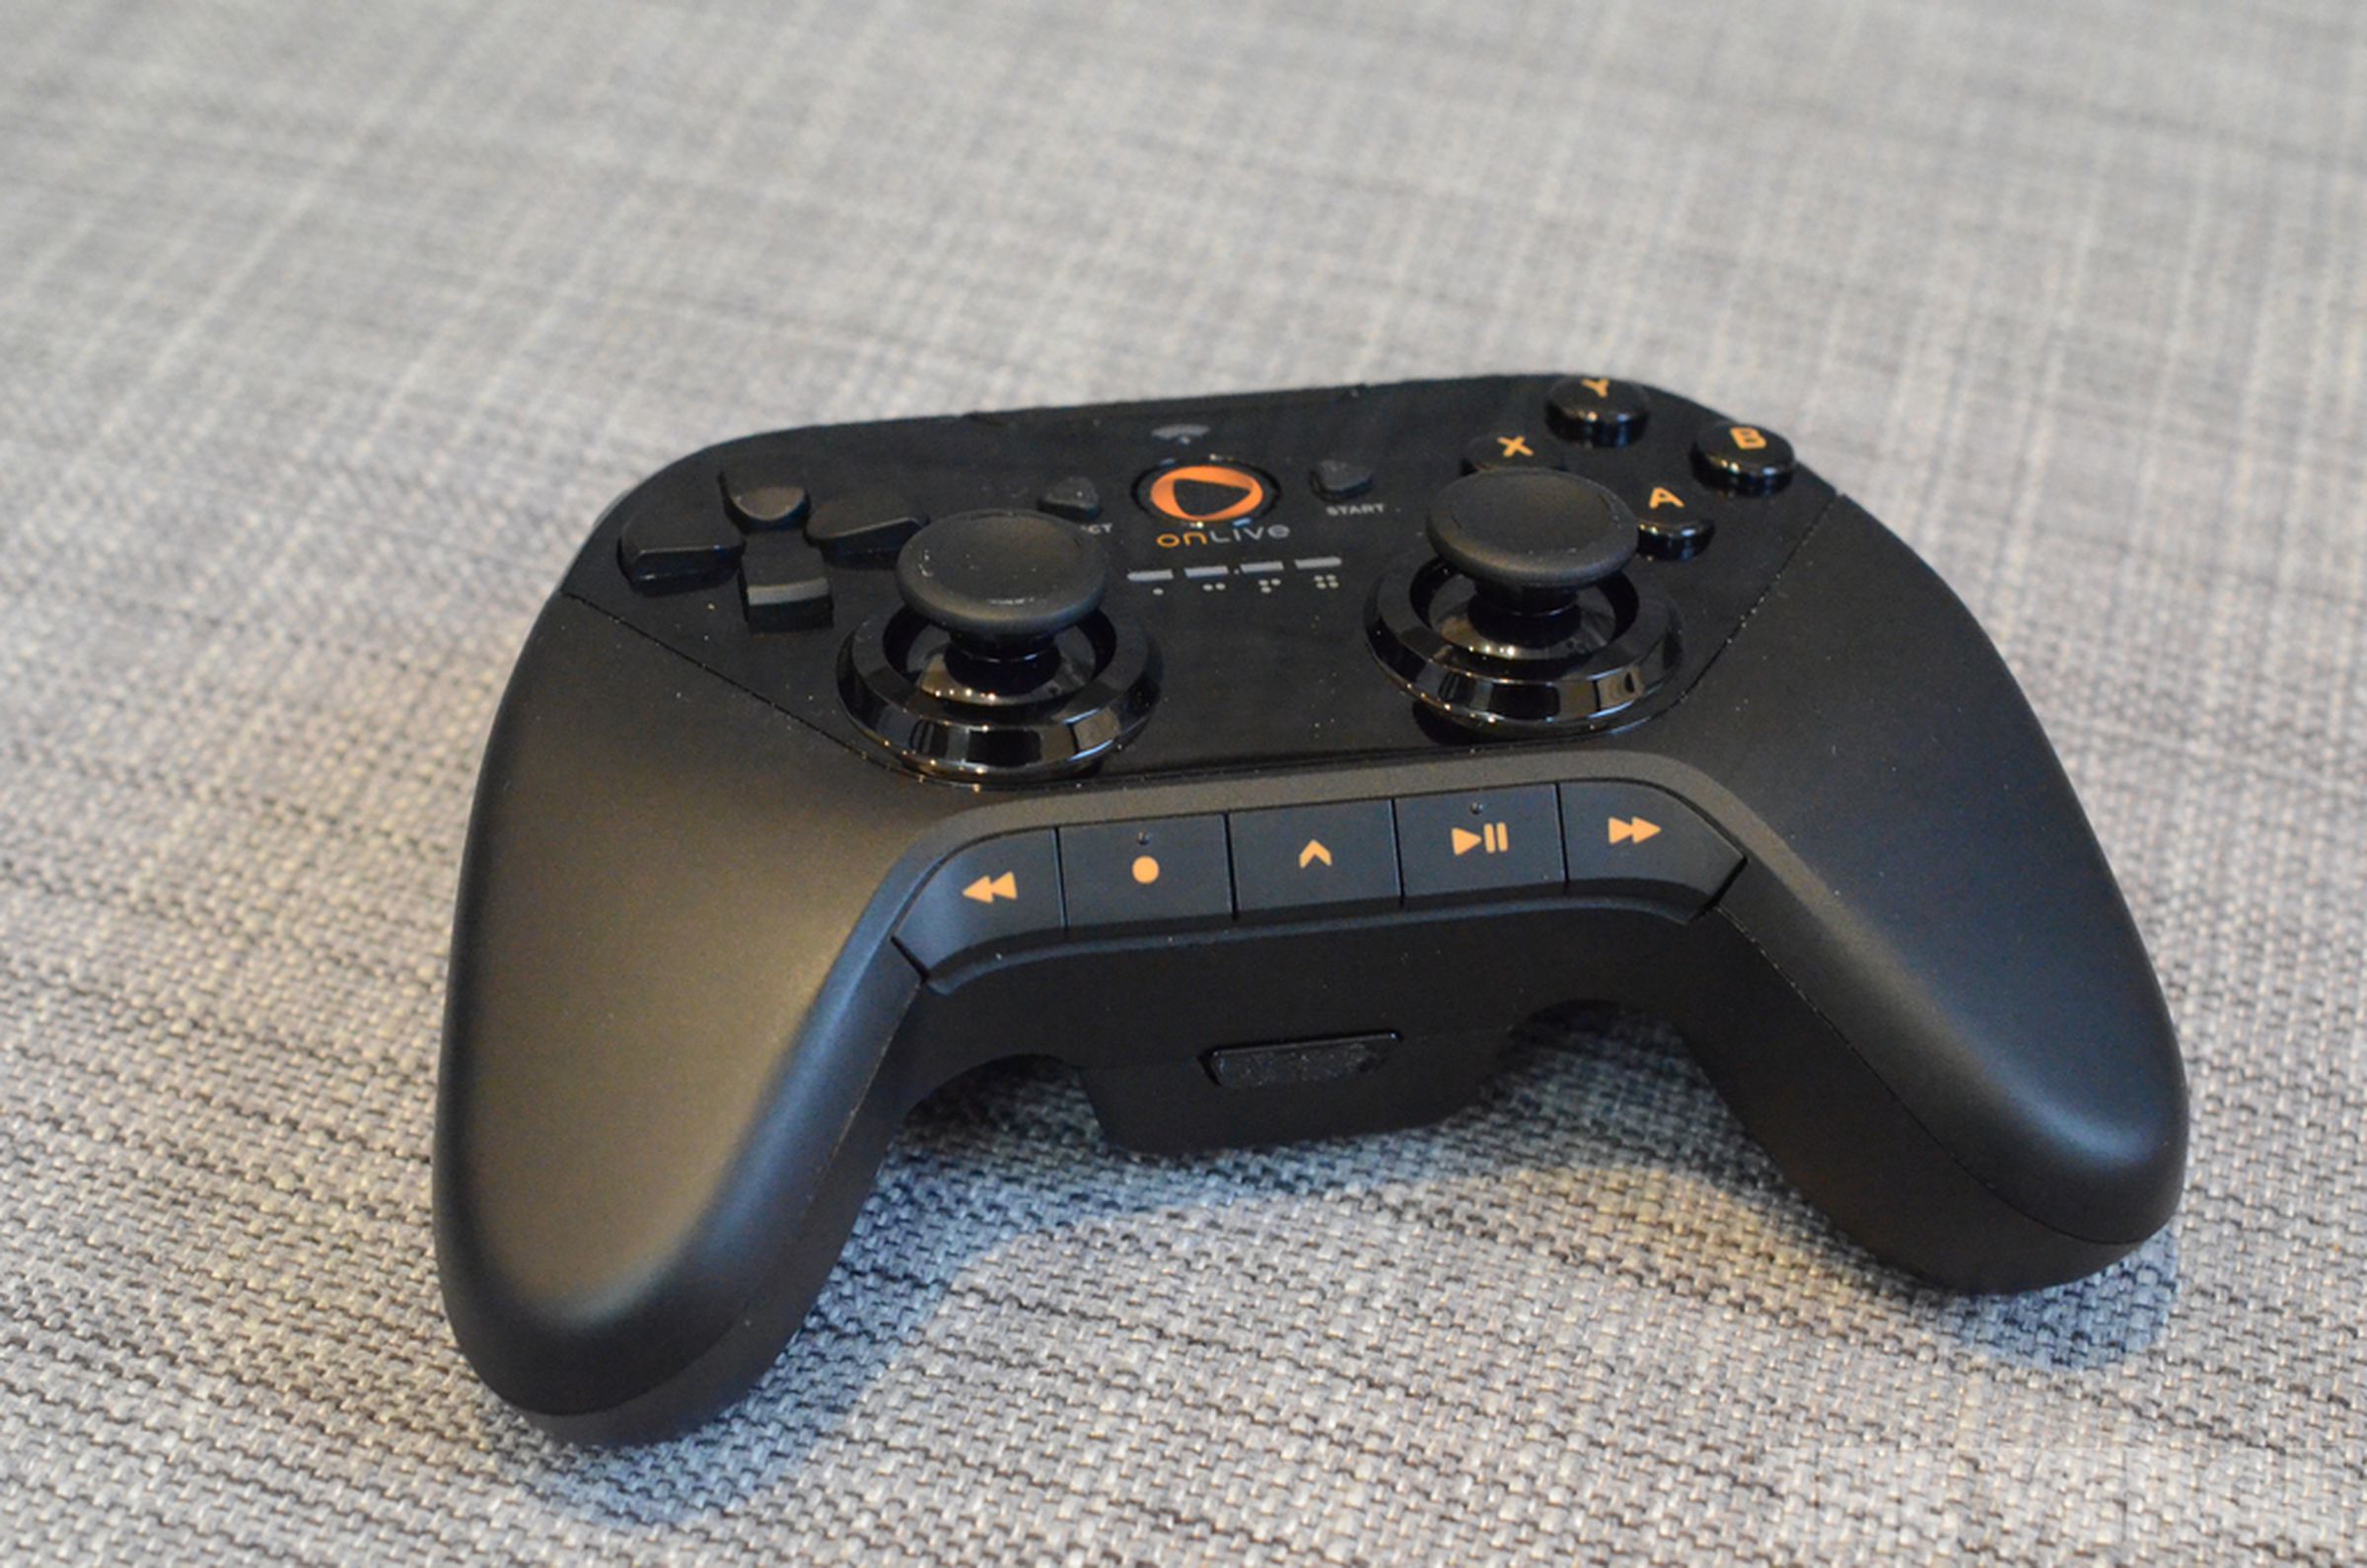 OnLive Universal Wireless Controller